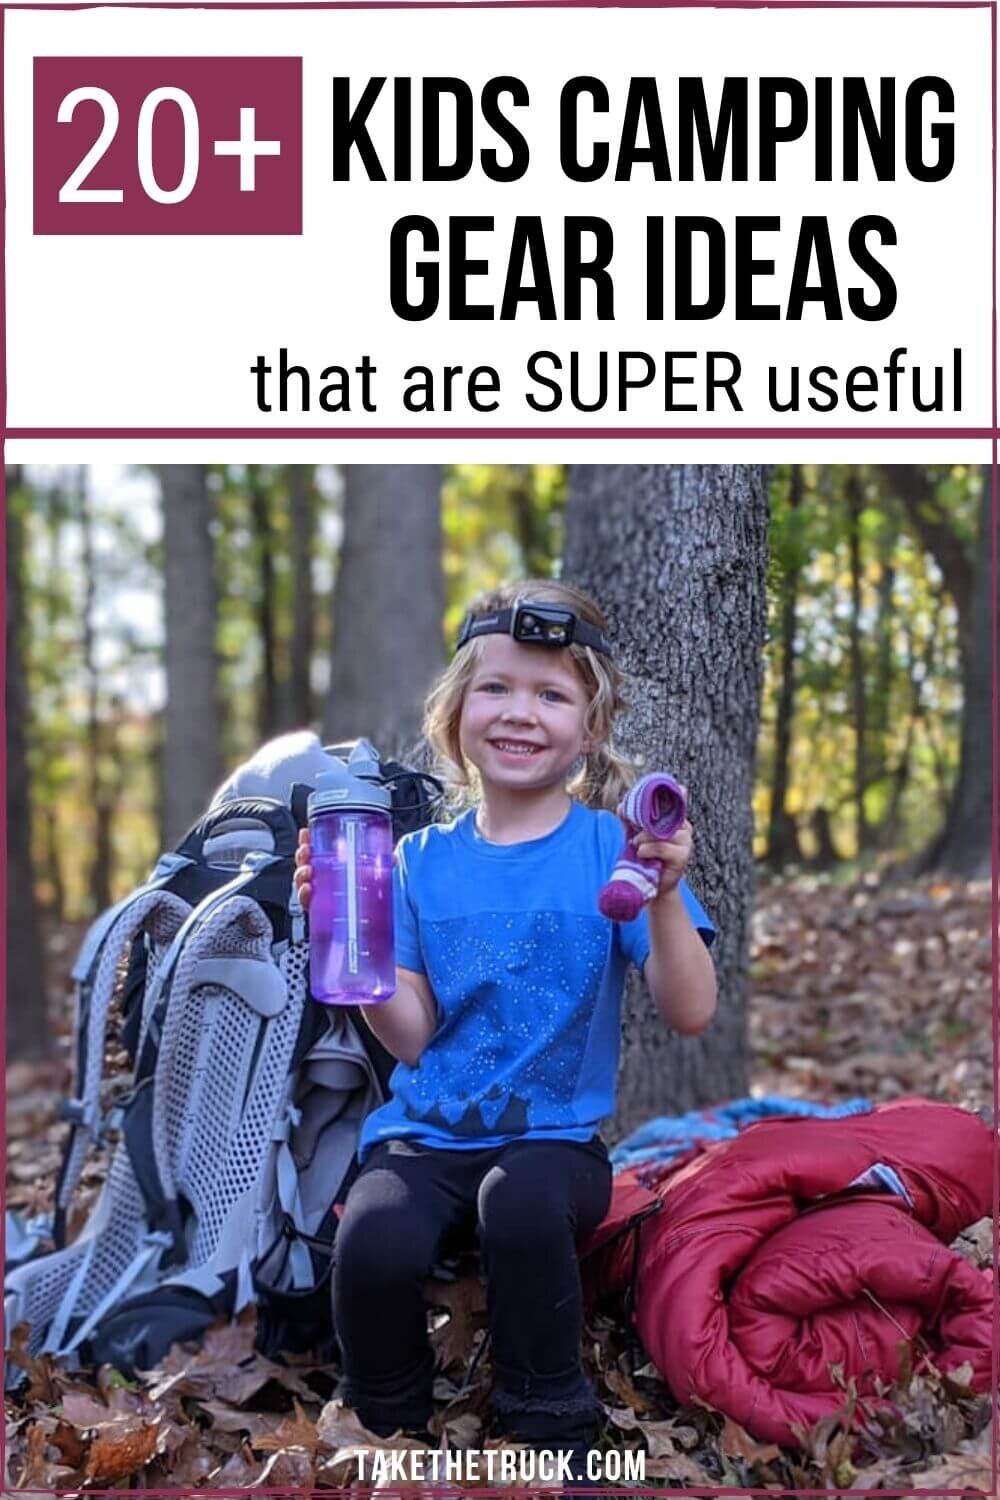 Searching for the best kids’ camping gear to buy for the children in your life? Check out over 20 useful camping gear ideas that make great outdoor gear gifts for kids, from babies up to teens.